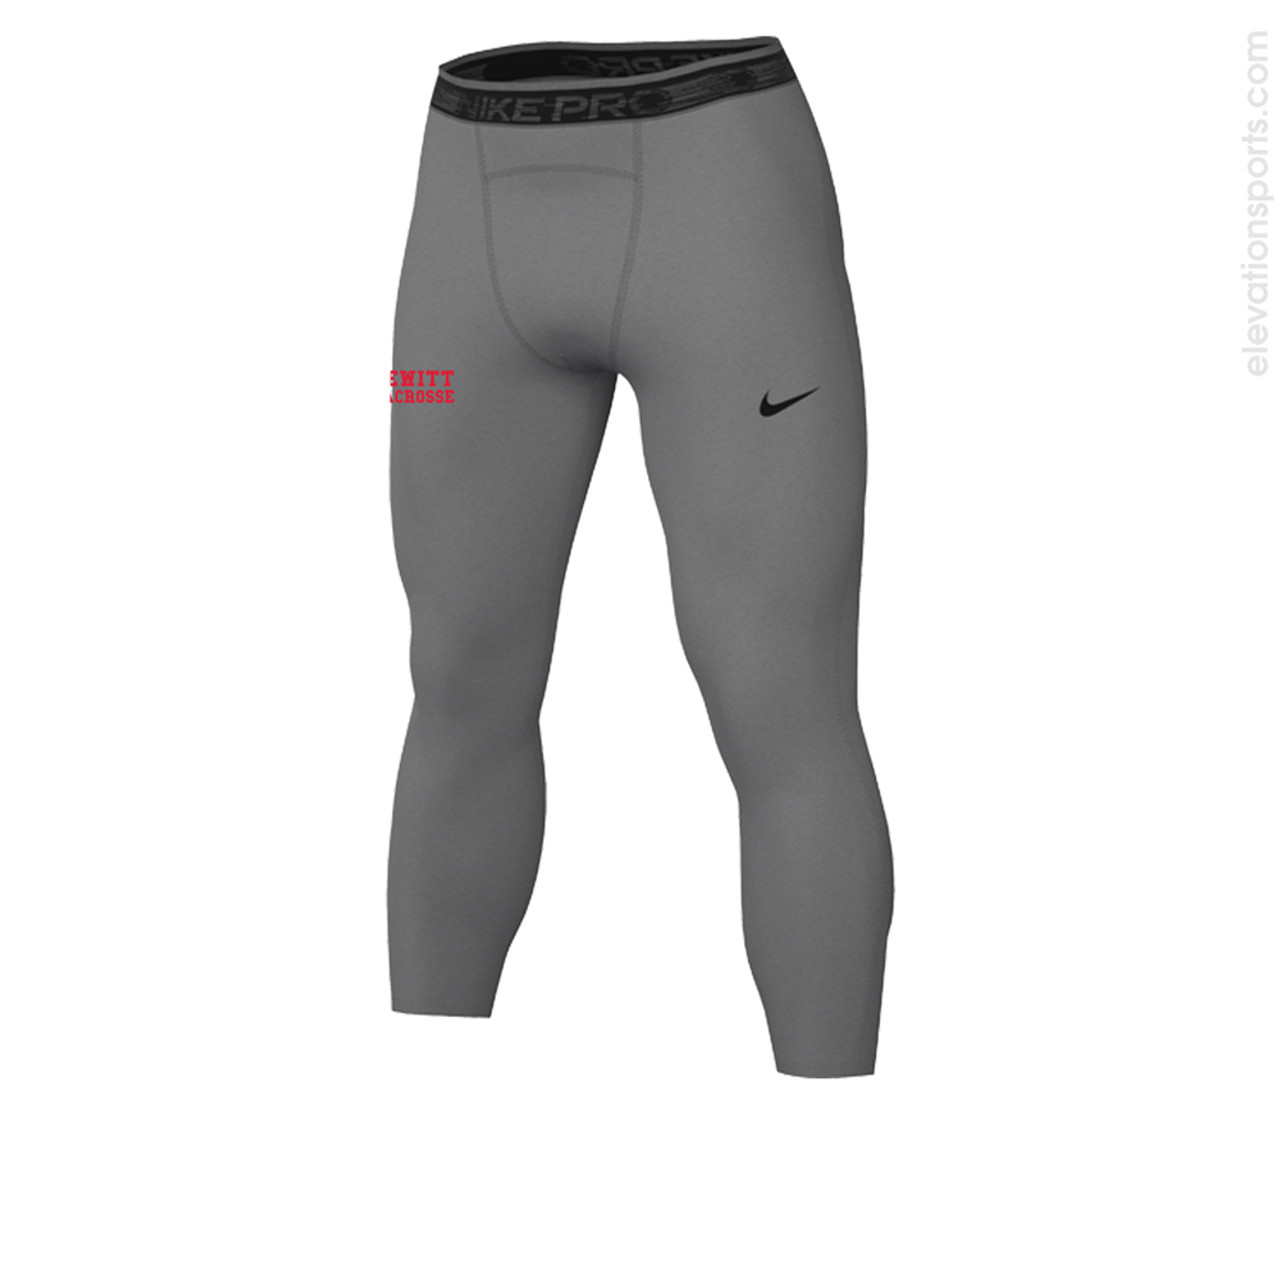 Nike Men's Pro Training 3/4 Compression Tights (Carbon Heather)